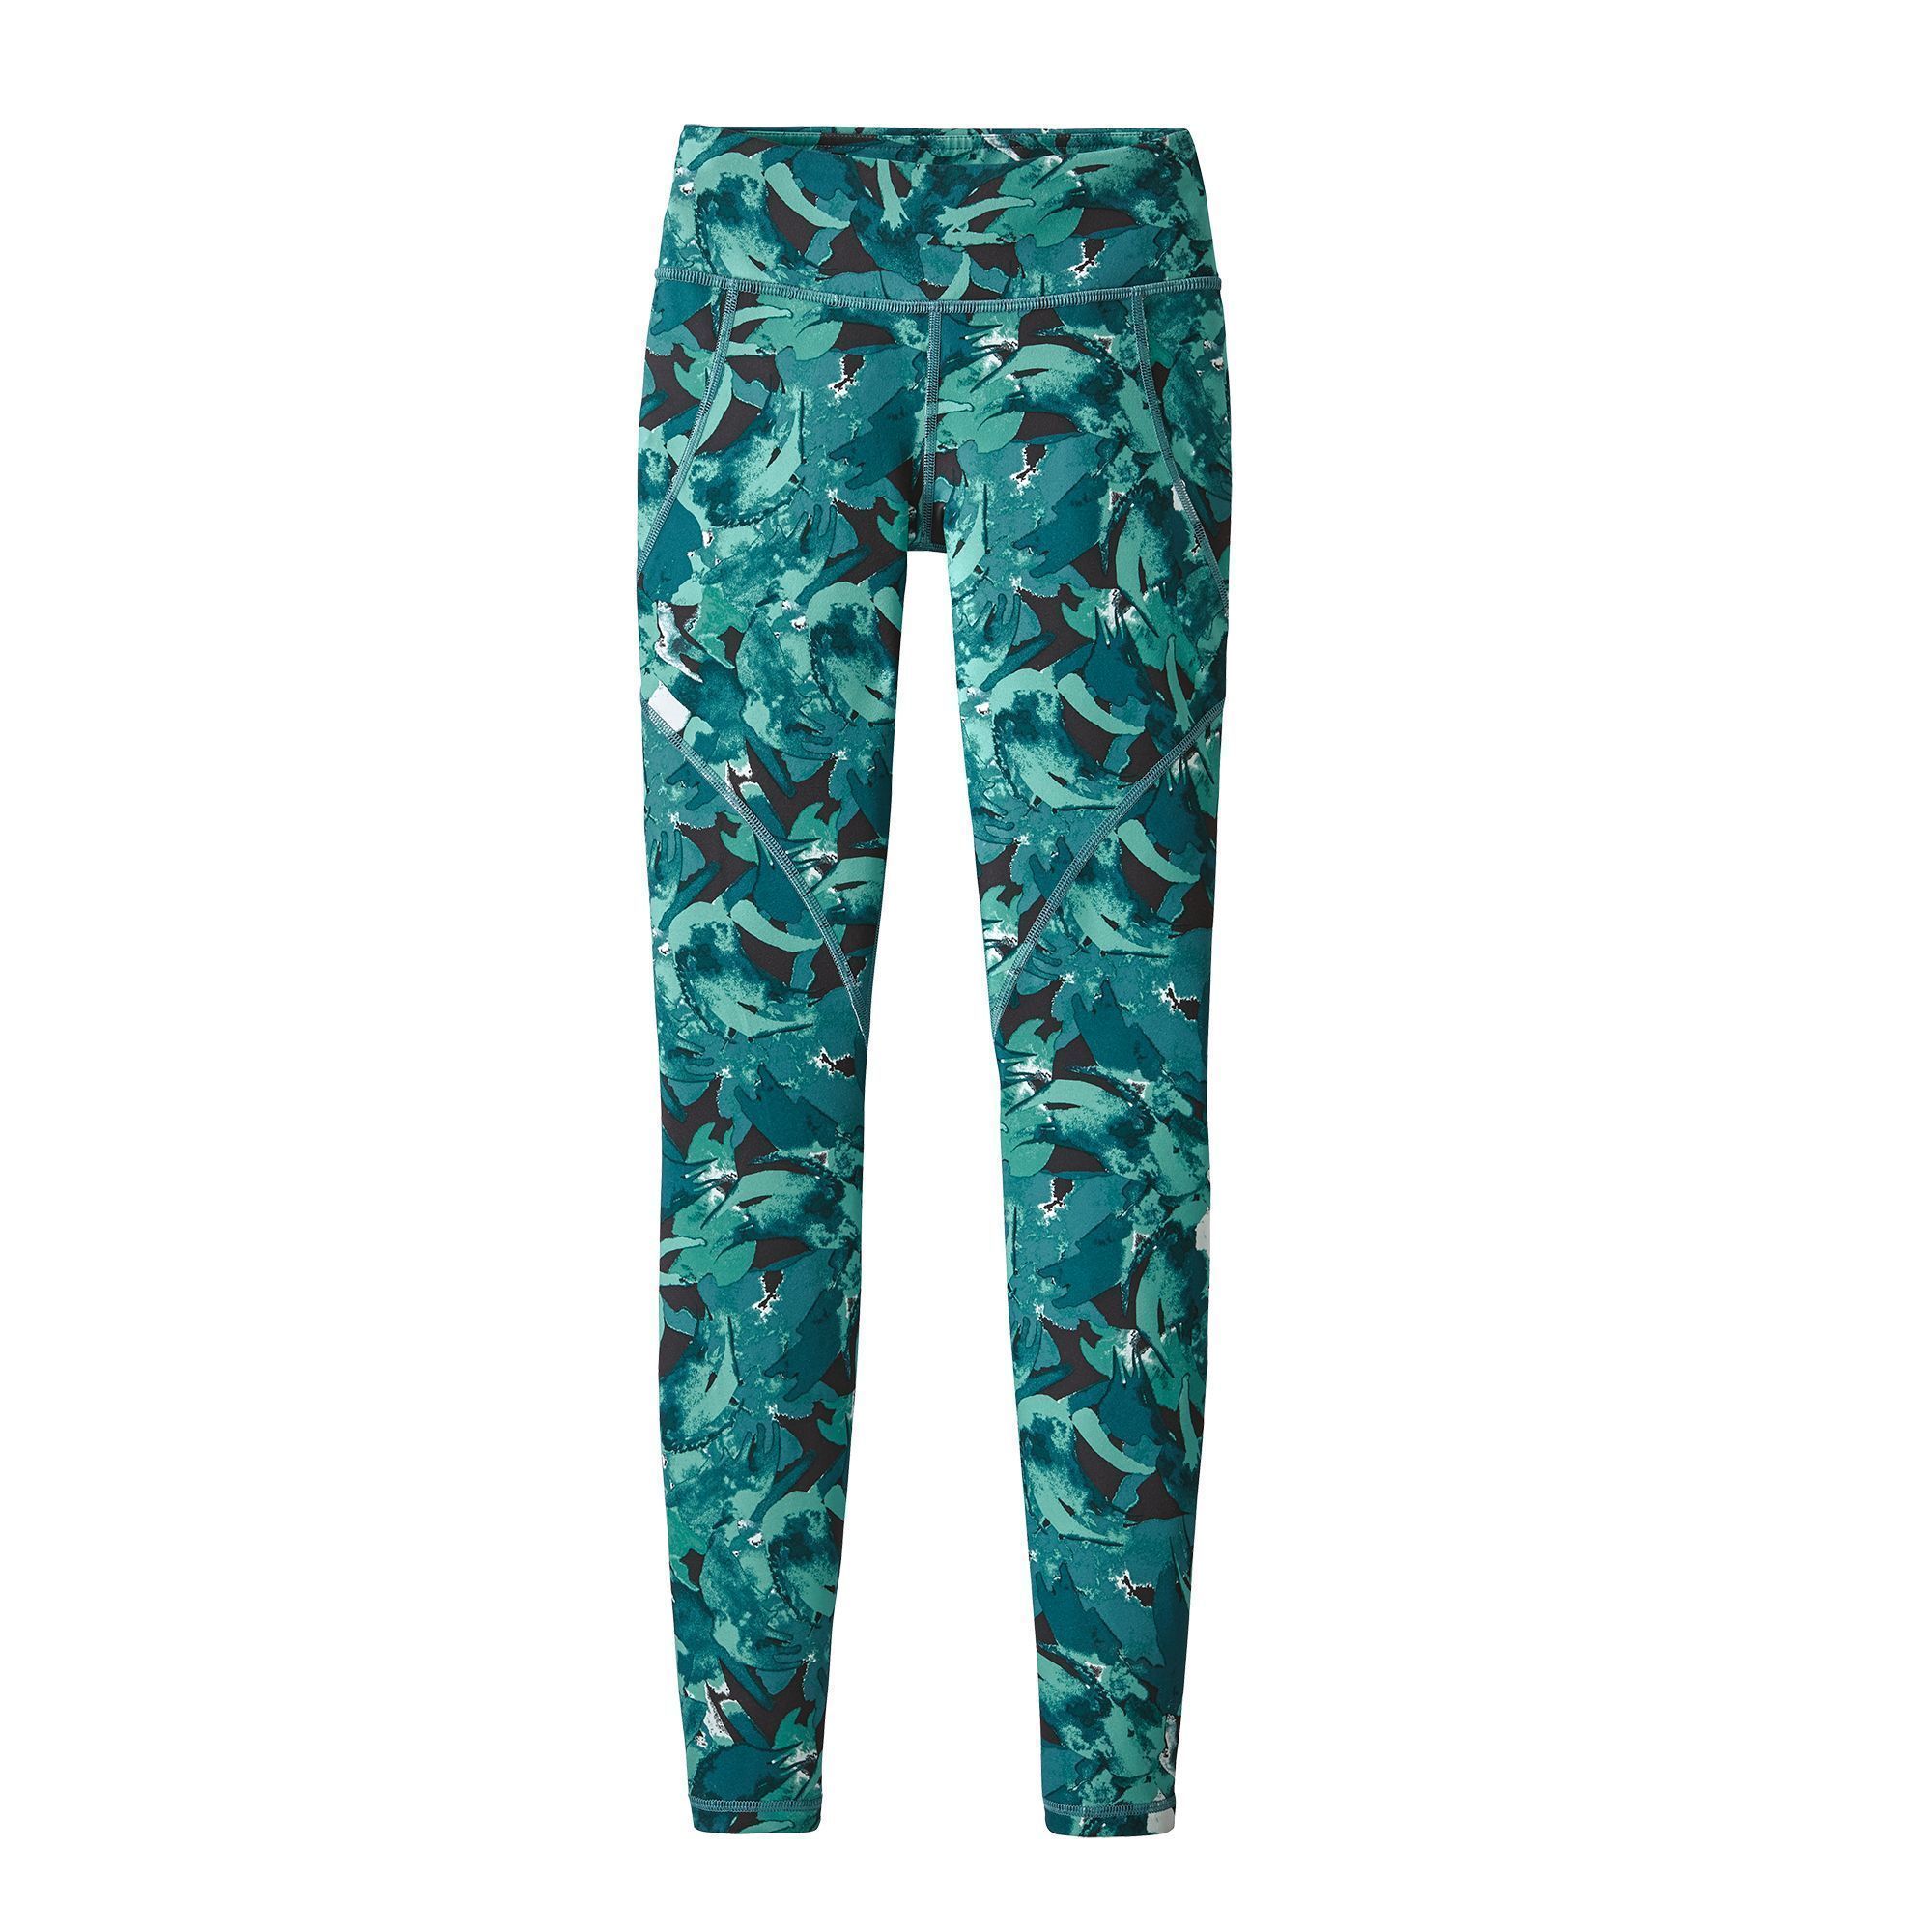 Patagonia Women's Centered Tights - Recycled Polyester, Abstract Jungle / XS